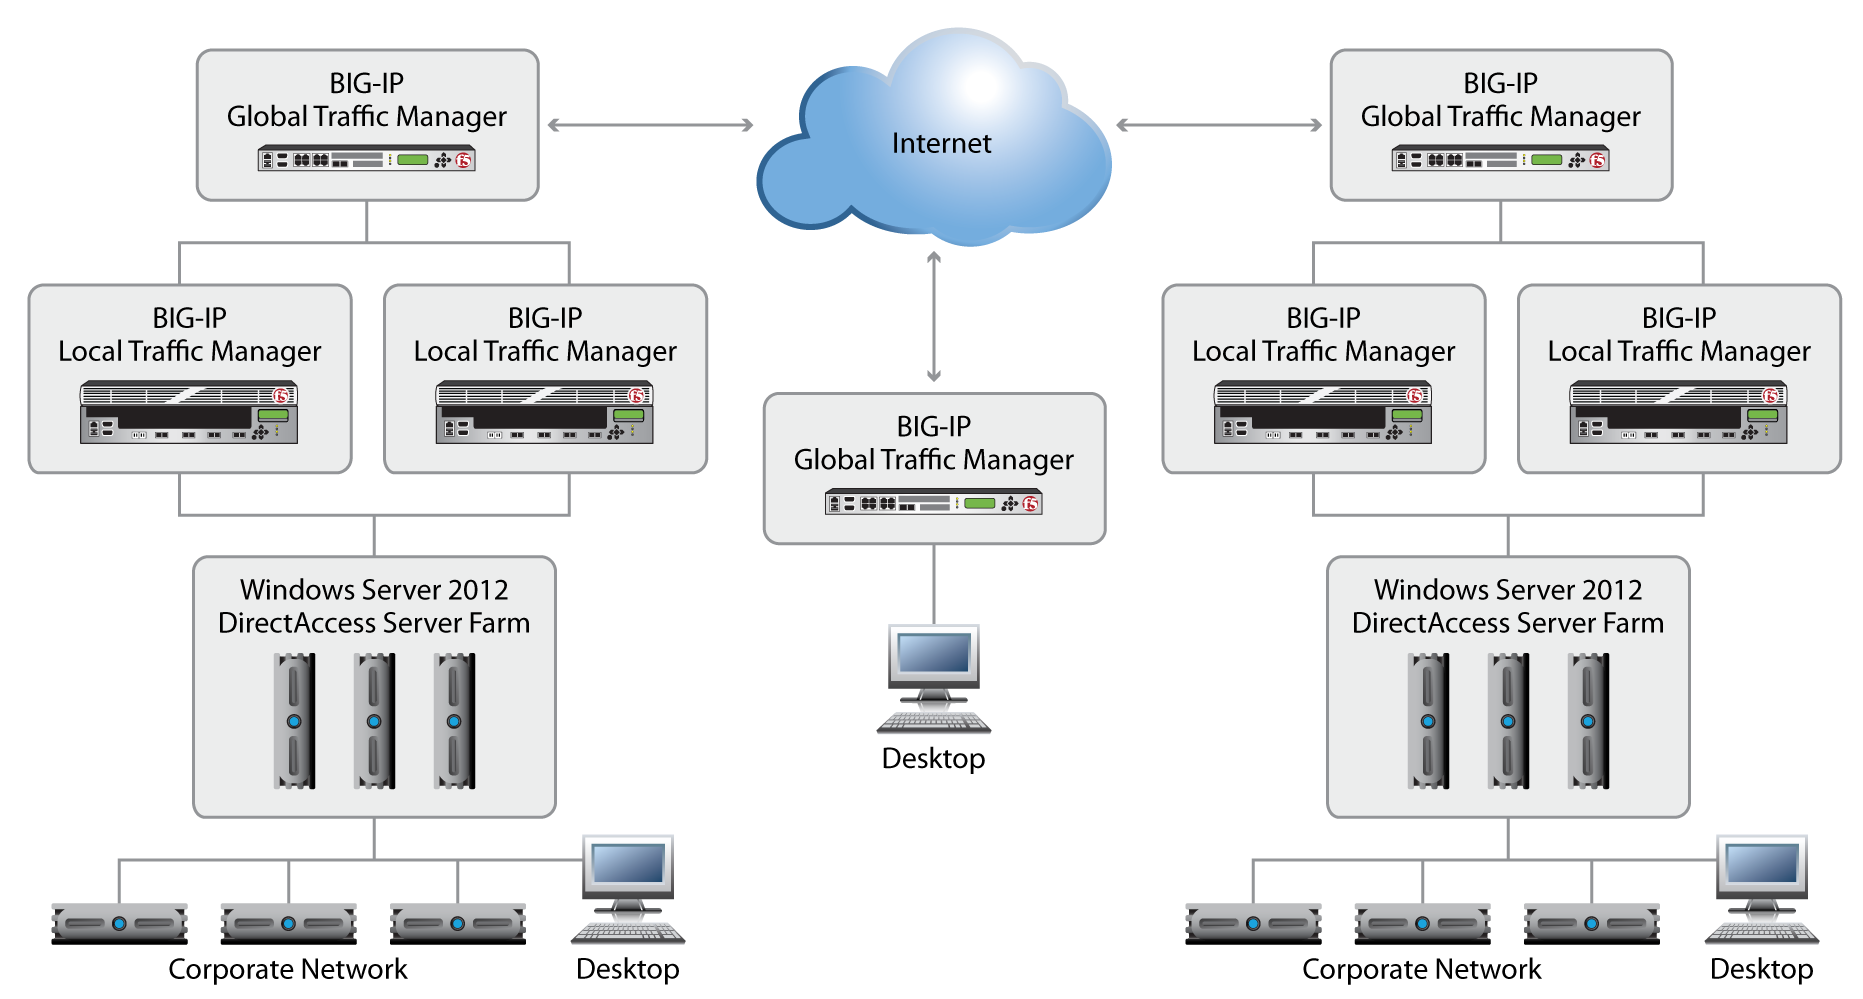 A wide area DirectAccess/VPN deployment